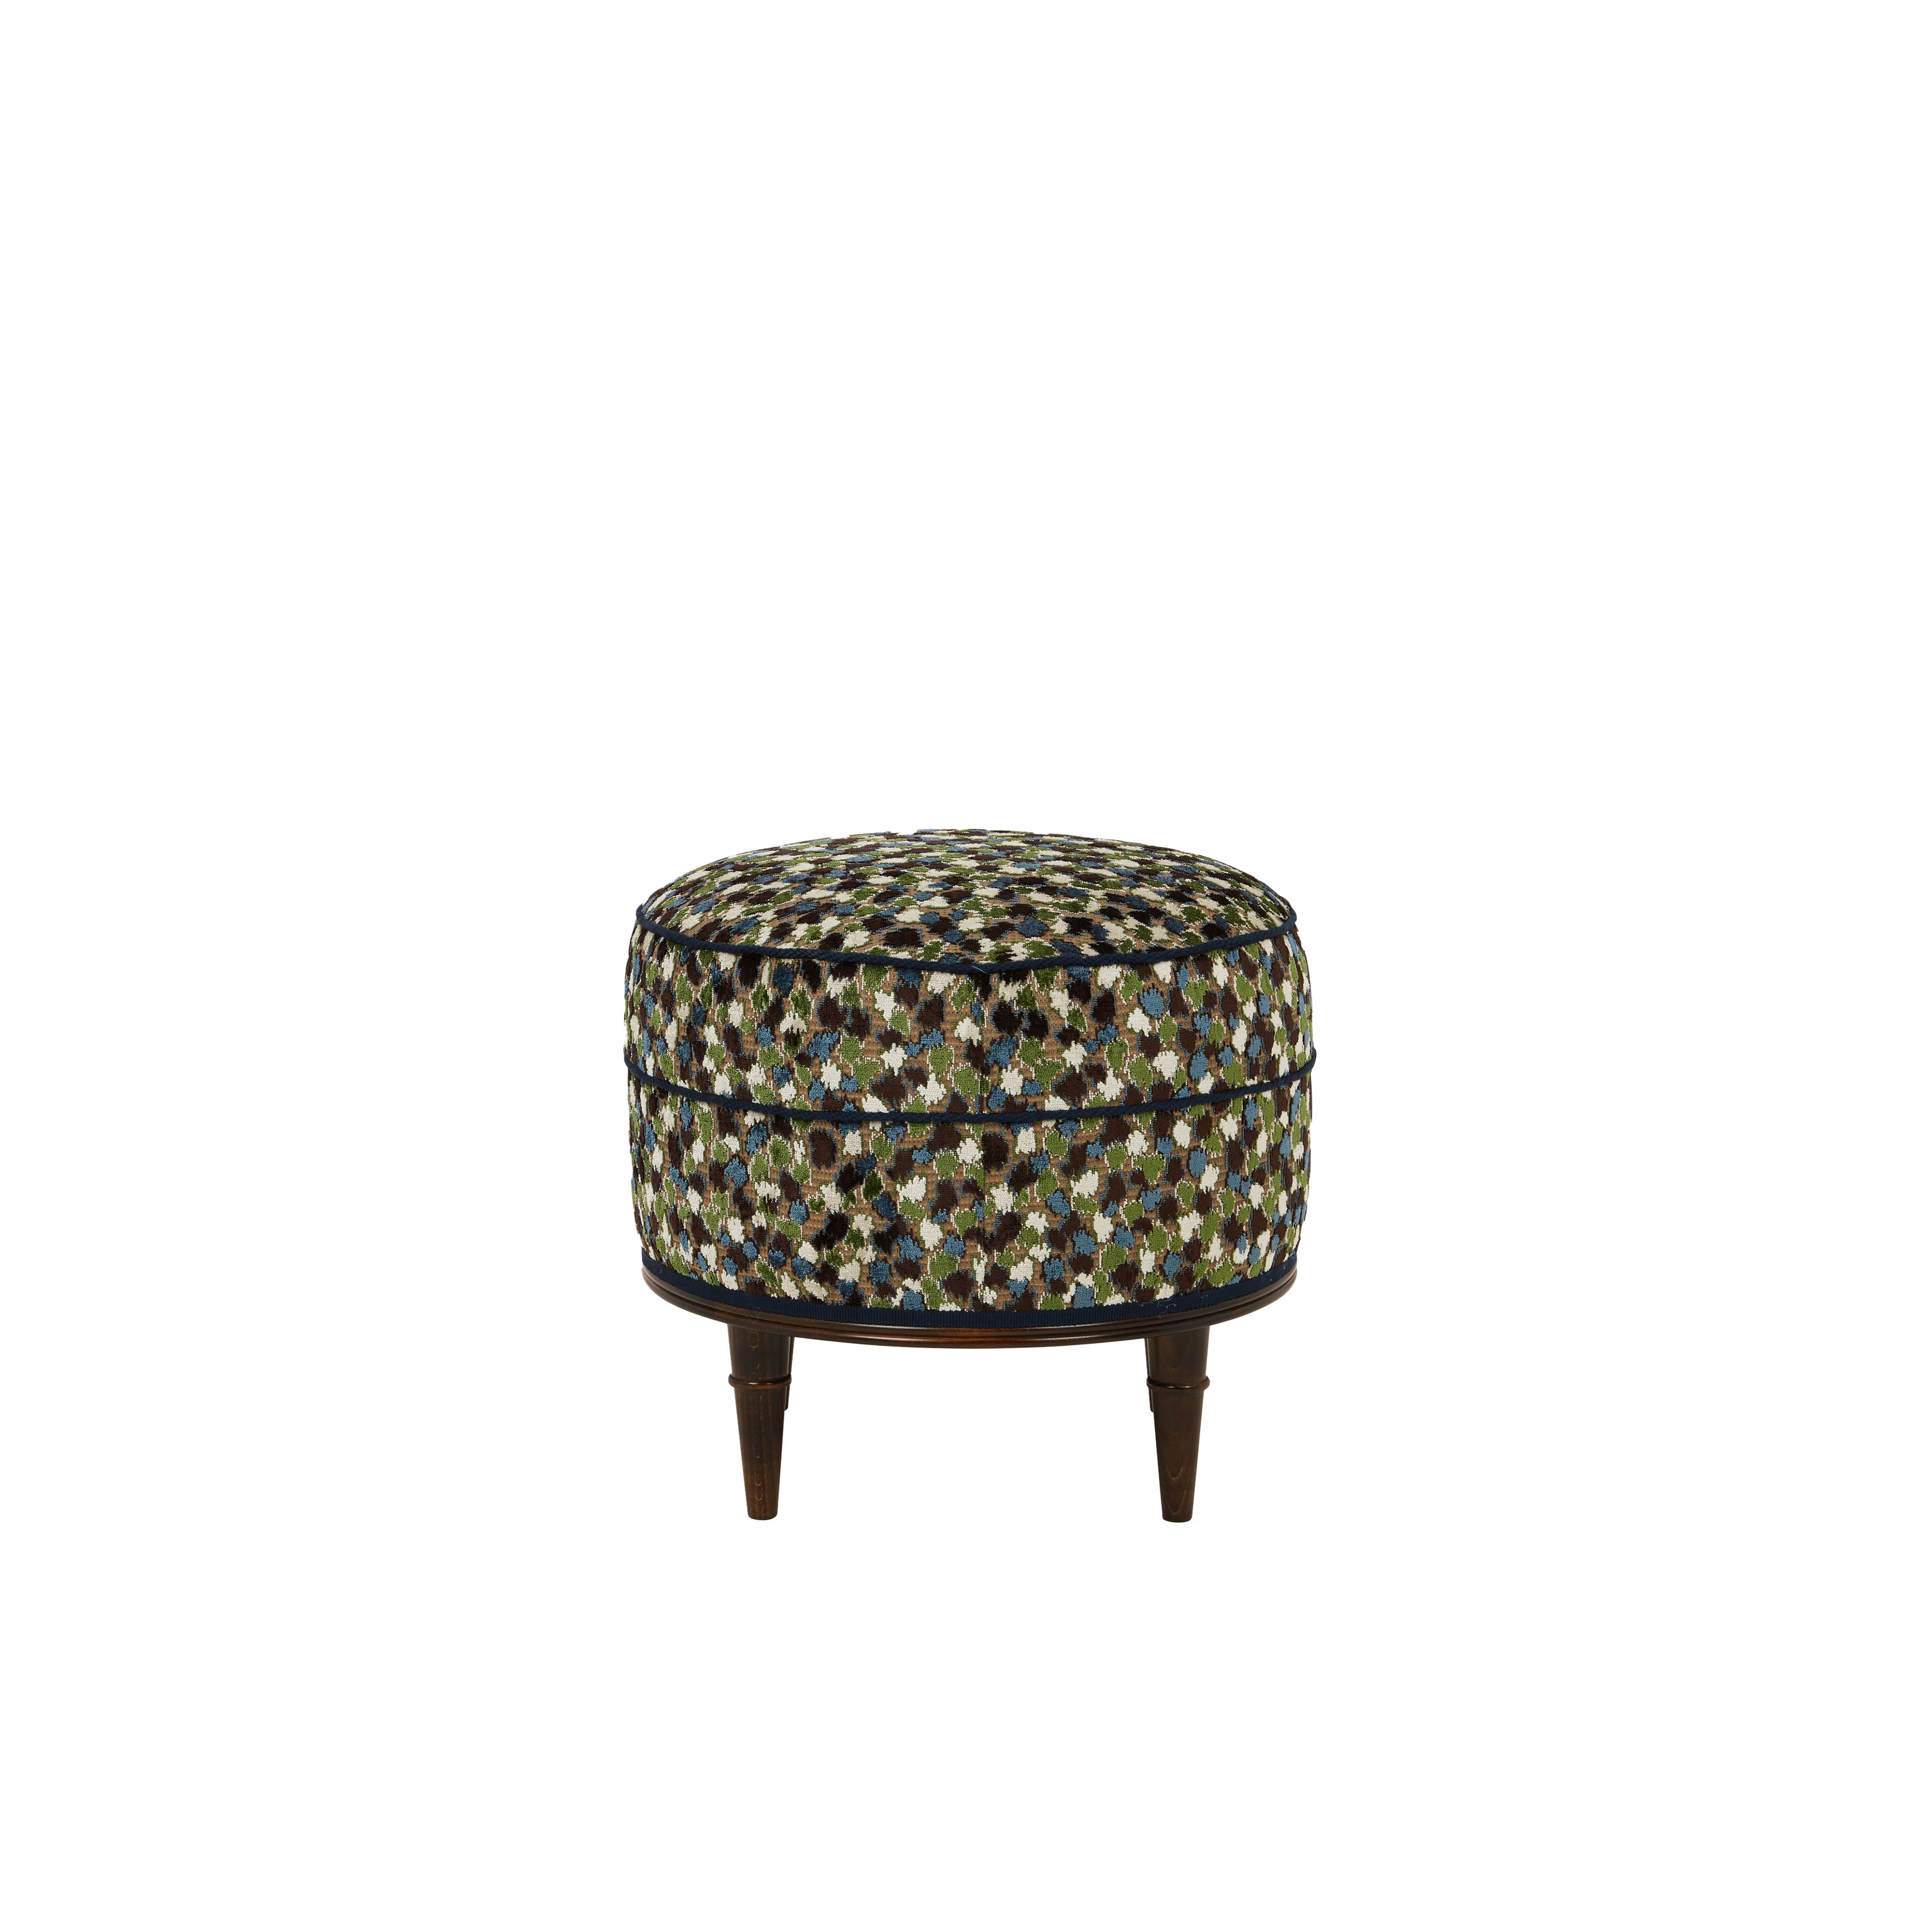 Nina Campbell Alice Stool in Orford Blue/Emerald/Chocolate